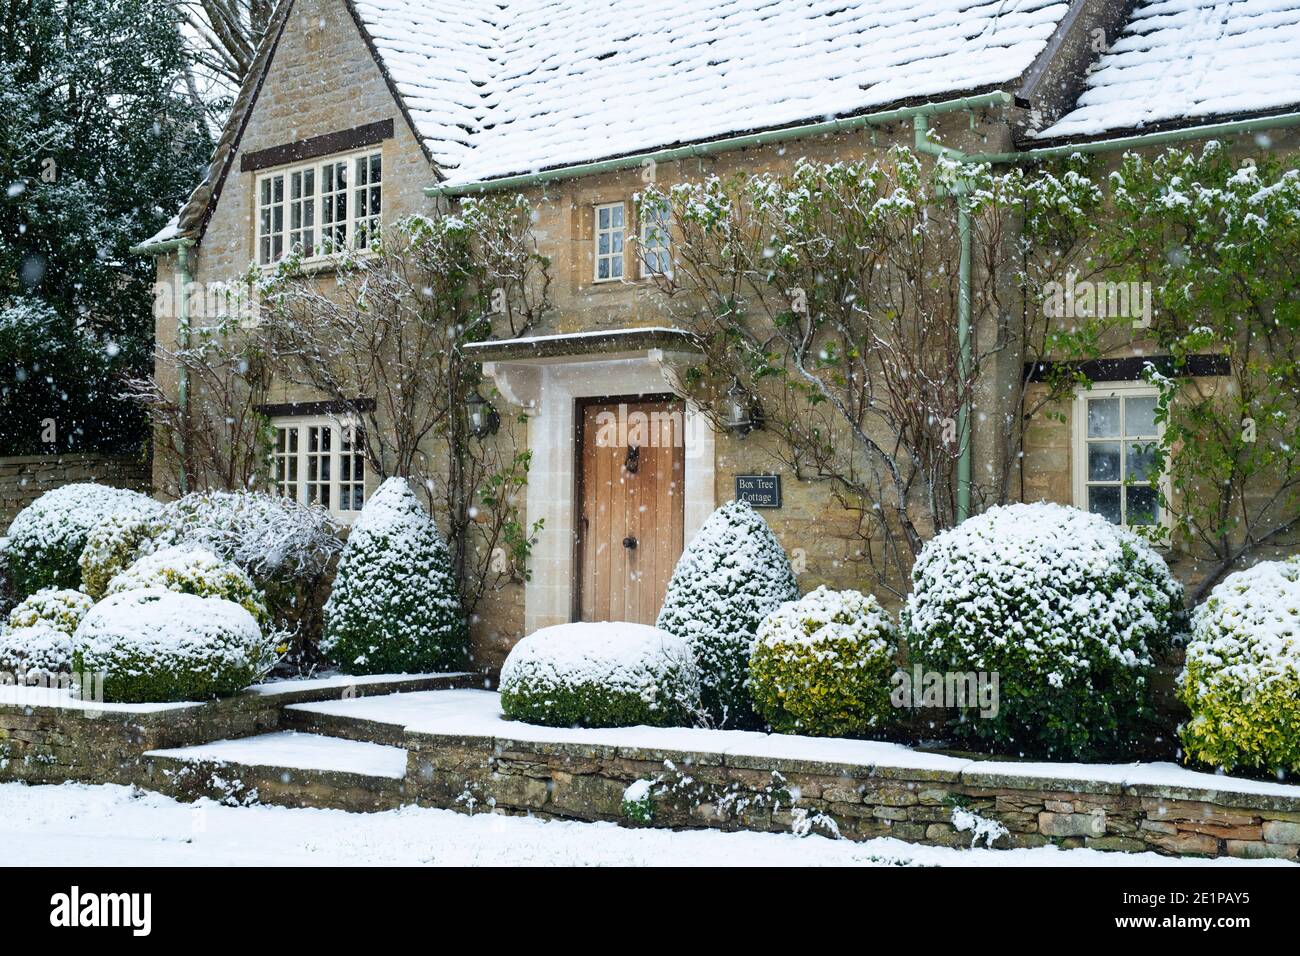 Cotswold stone cottage with clipped box hedges in the December snow. Taynton, Cotswolds, Oxfordshire, England Stock Photo